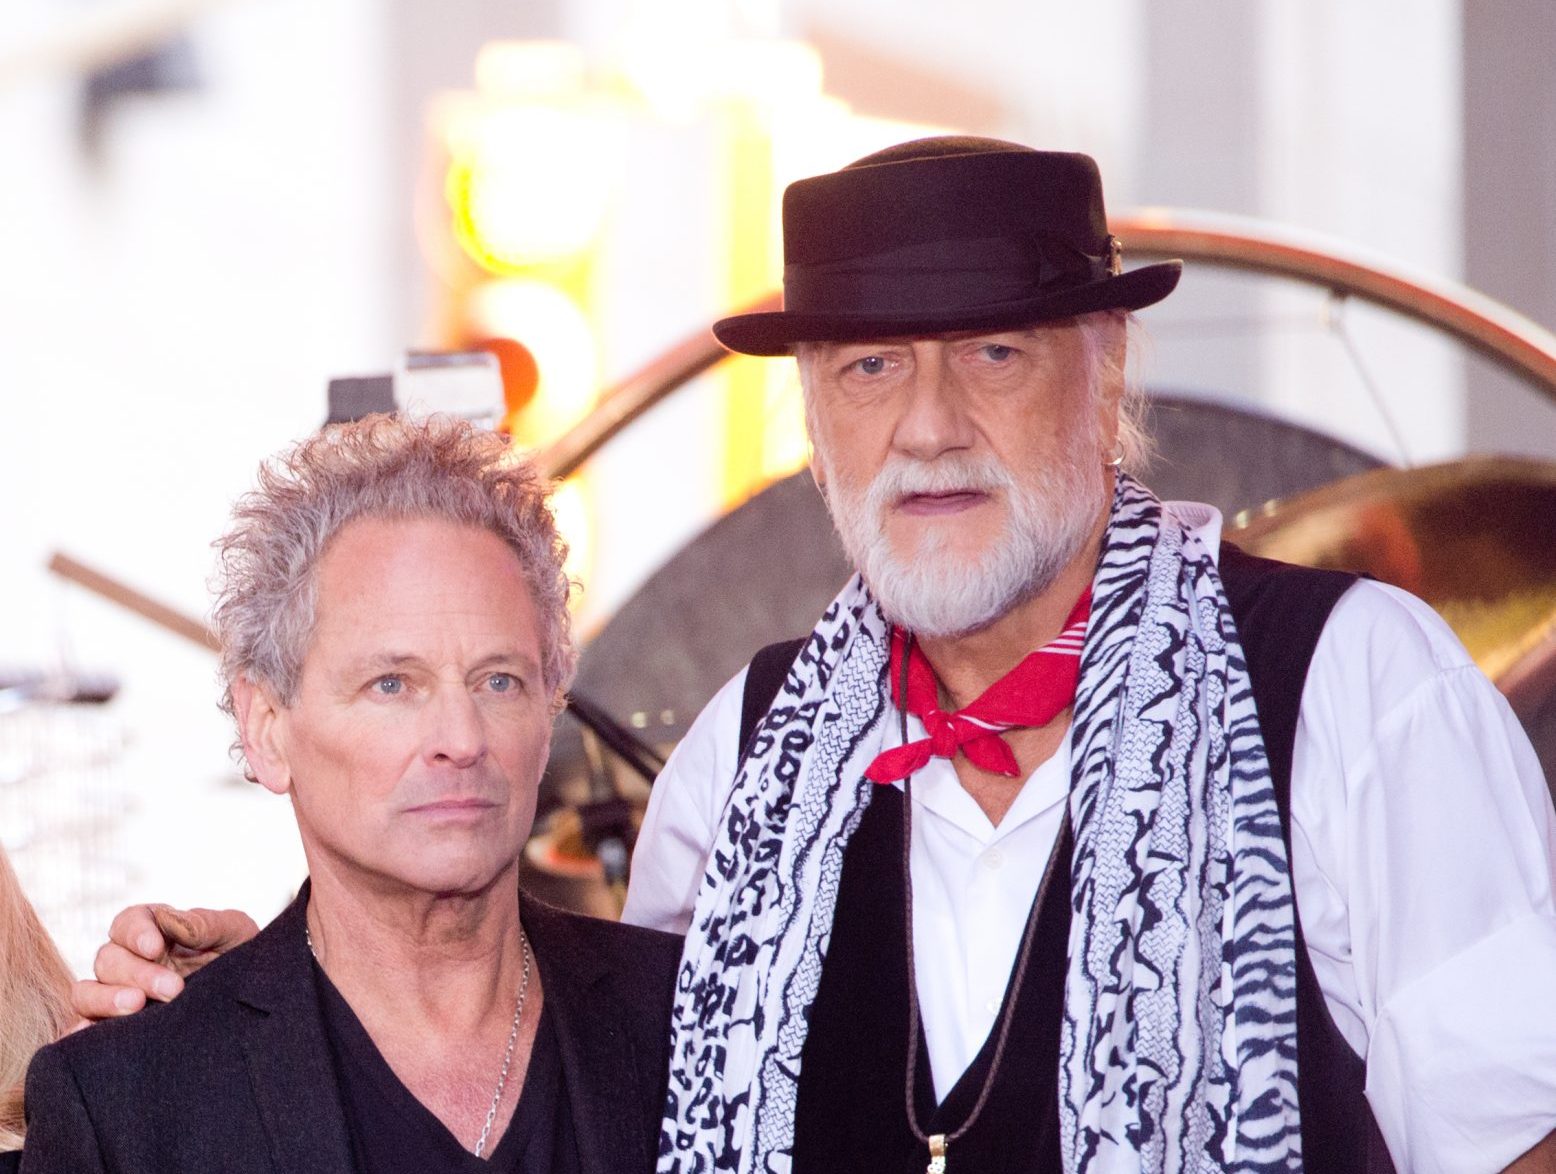 Mick Fleetwood 'Reconnected' with Lindsey Buckingham, Open to Reunion